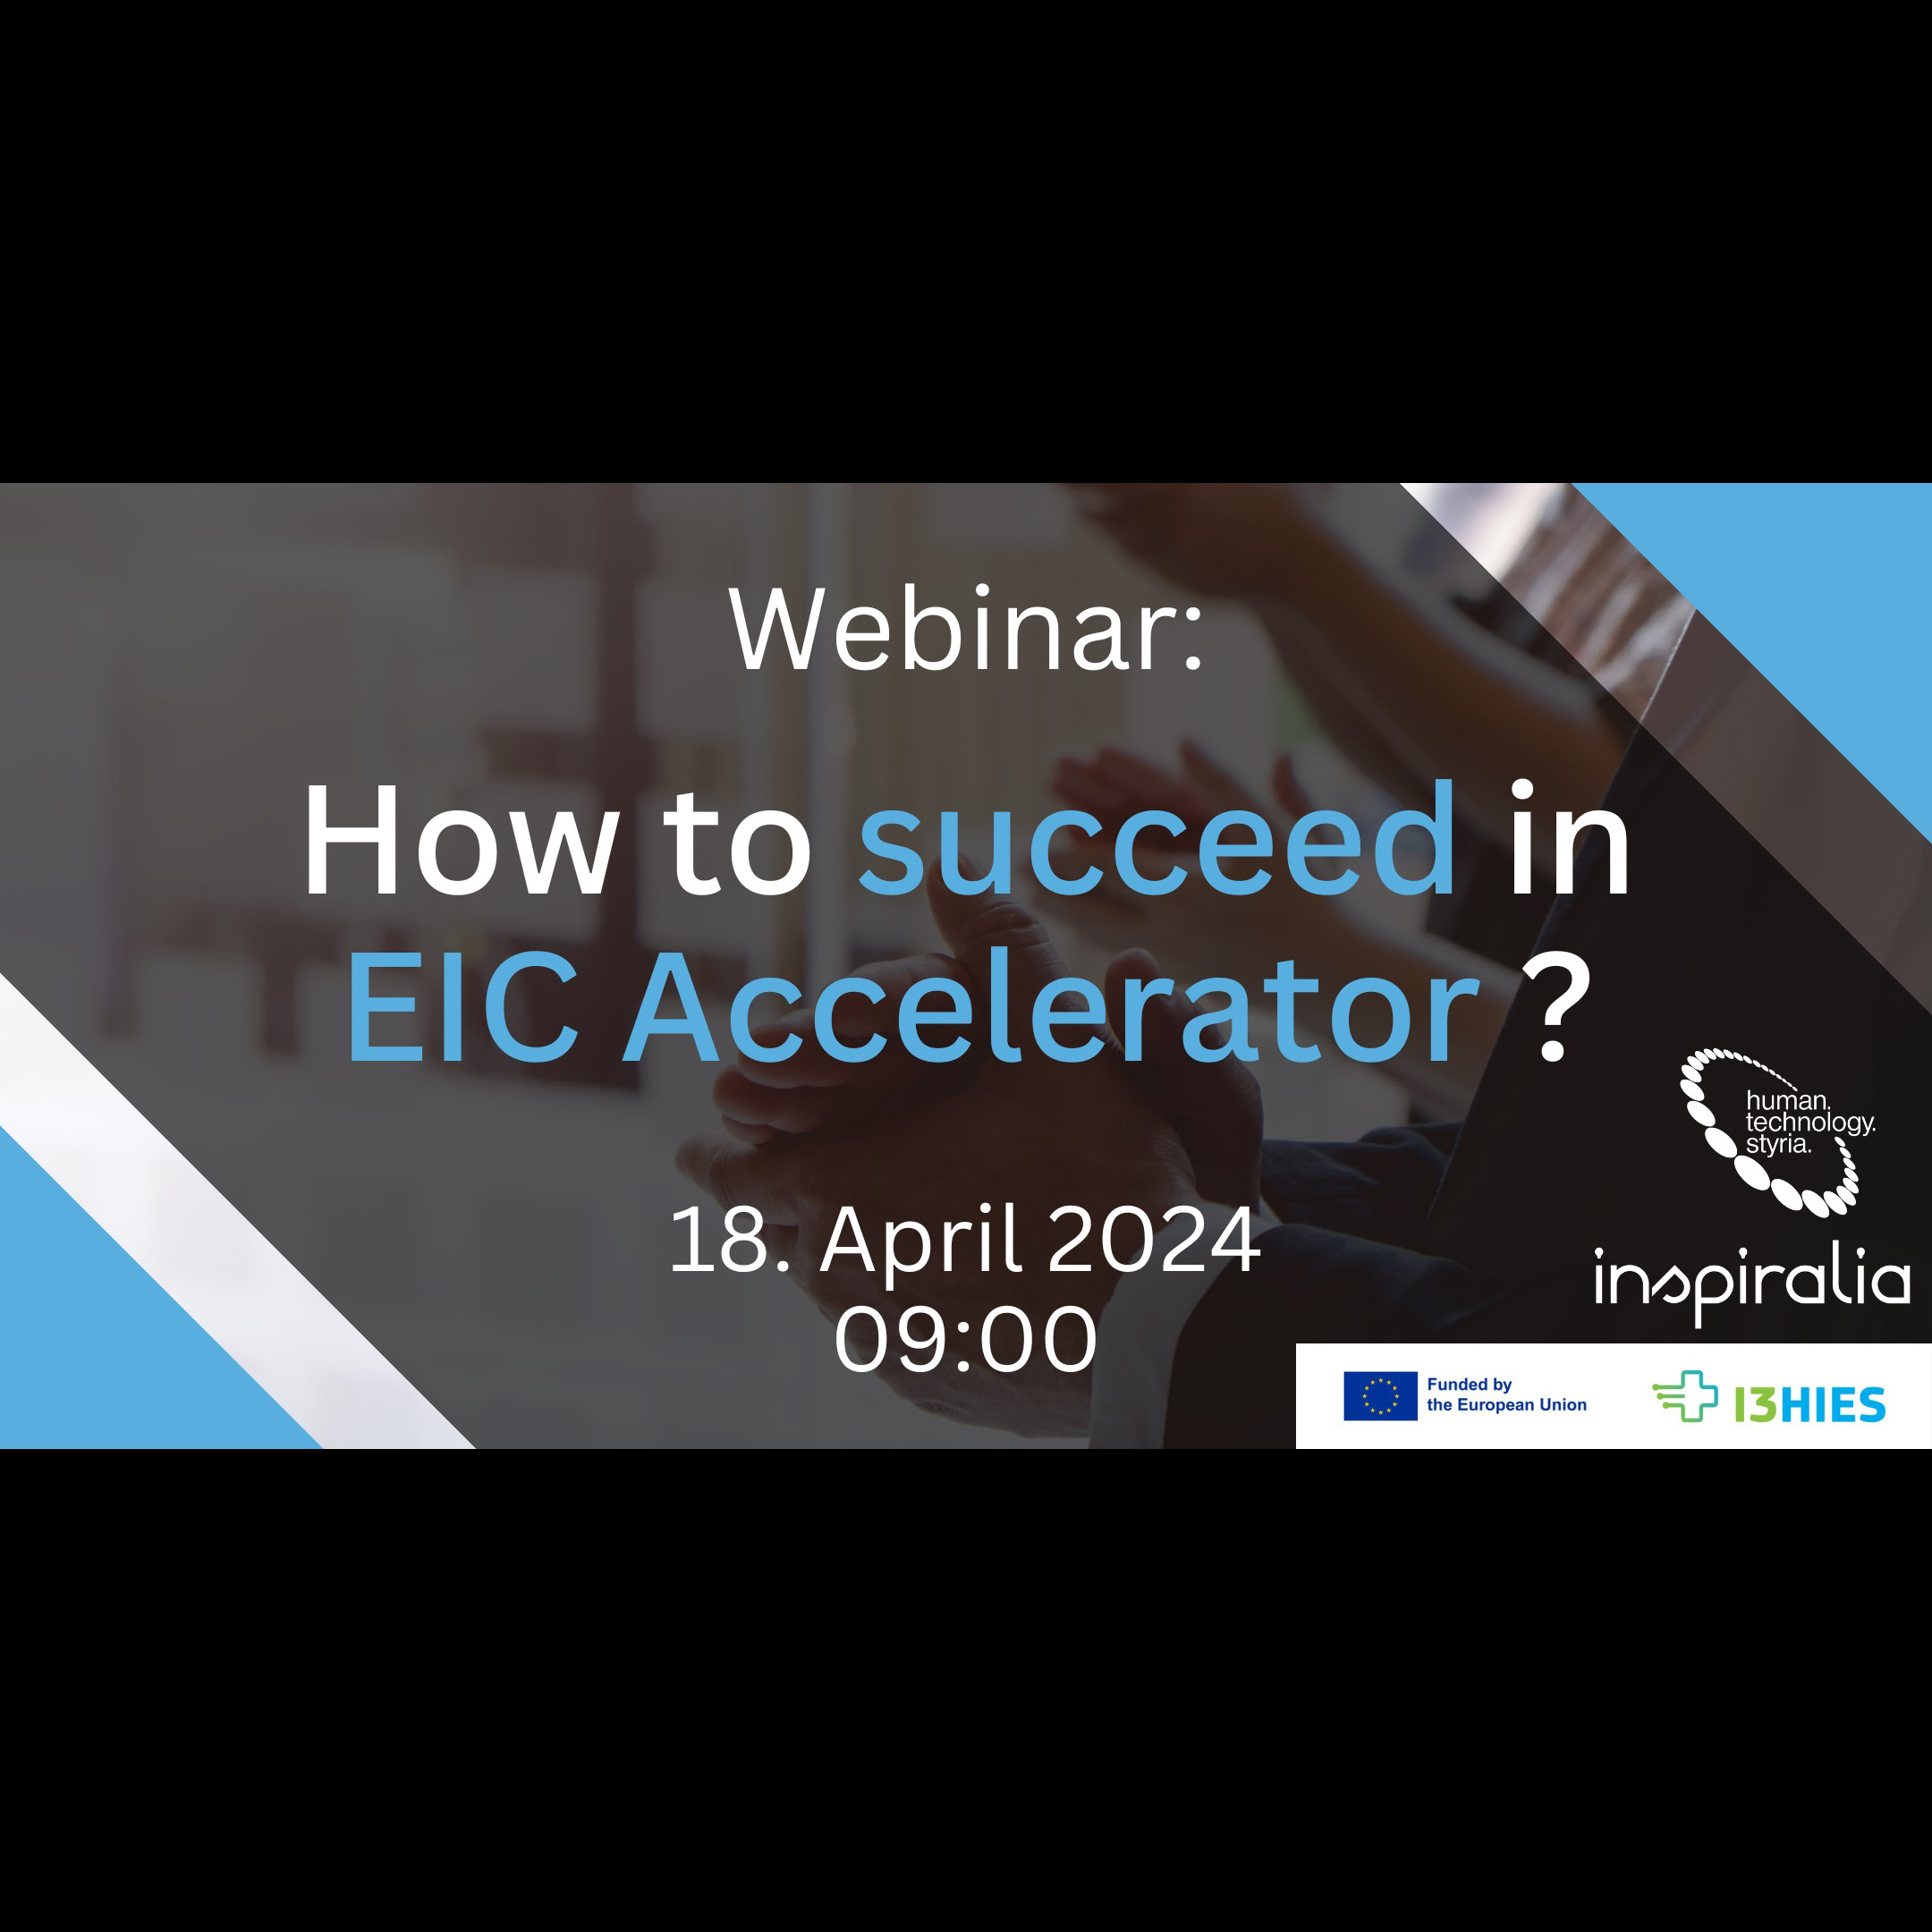 How to succeed in EIC Accelerator?